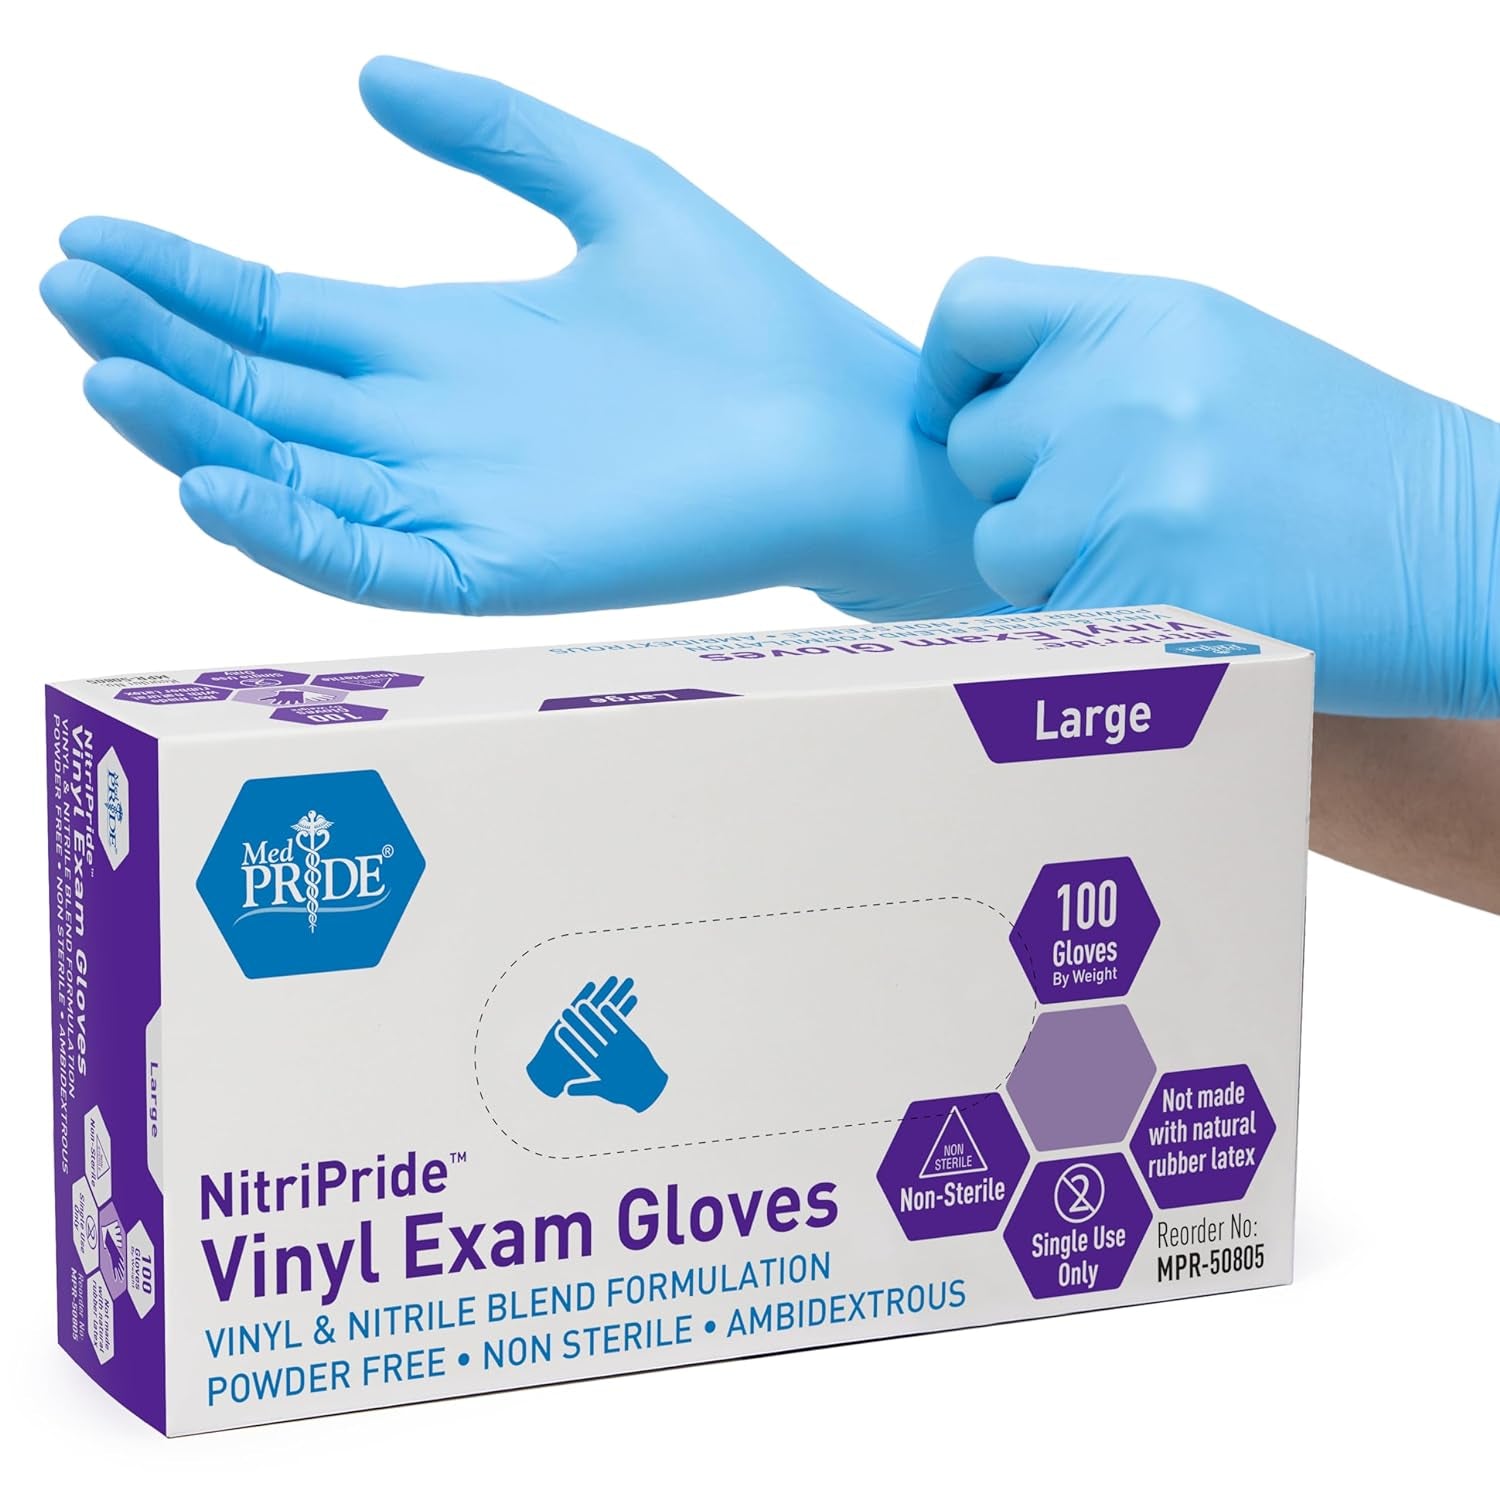 Nitripride Nitrile-Vinyl Blend Exam Gloves, Large 100 - Powder Free, Latex Free & Rubber Free - Single Use Non-Sterile Protective Gloves for Medical Use, Cooking, Cleaning & More